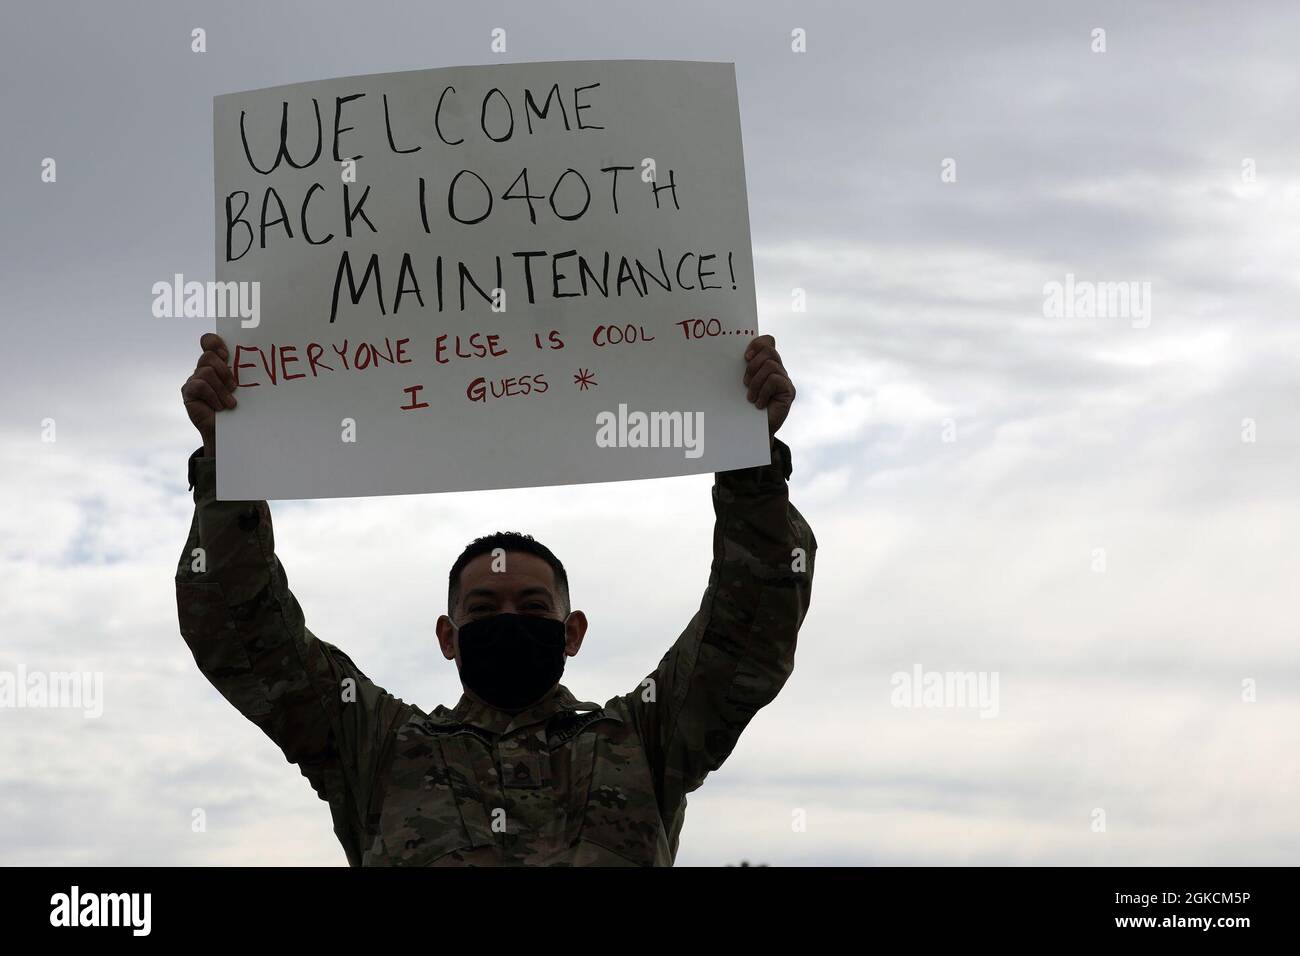 U.S. Army Staff Sgt. Martin Muneton, motor sergeant for the California Army National Guard’s 1040th Quartermaster Company, 340th Brigade Support Battalion, 115th Regional Support Group, lifts a welcome back sign as 40-plus troops arrive at Stockton Metropolitan Airport March 14, 2021 after a two-month mission in Washington, D.C. to support the Jan. 6 presidential inauguration. Stock Photo